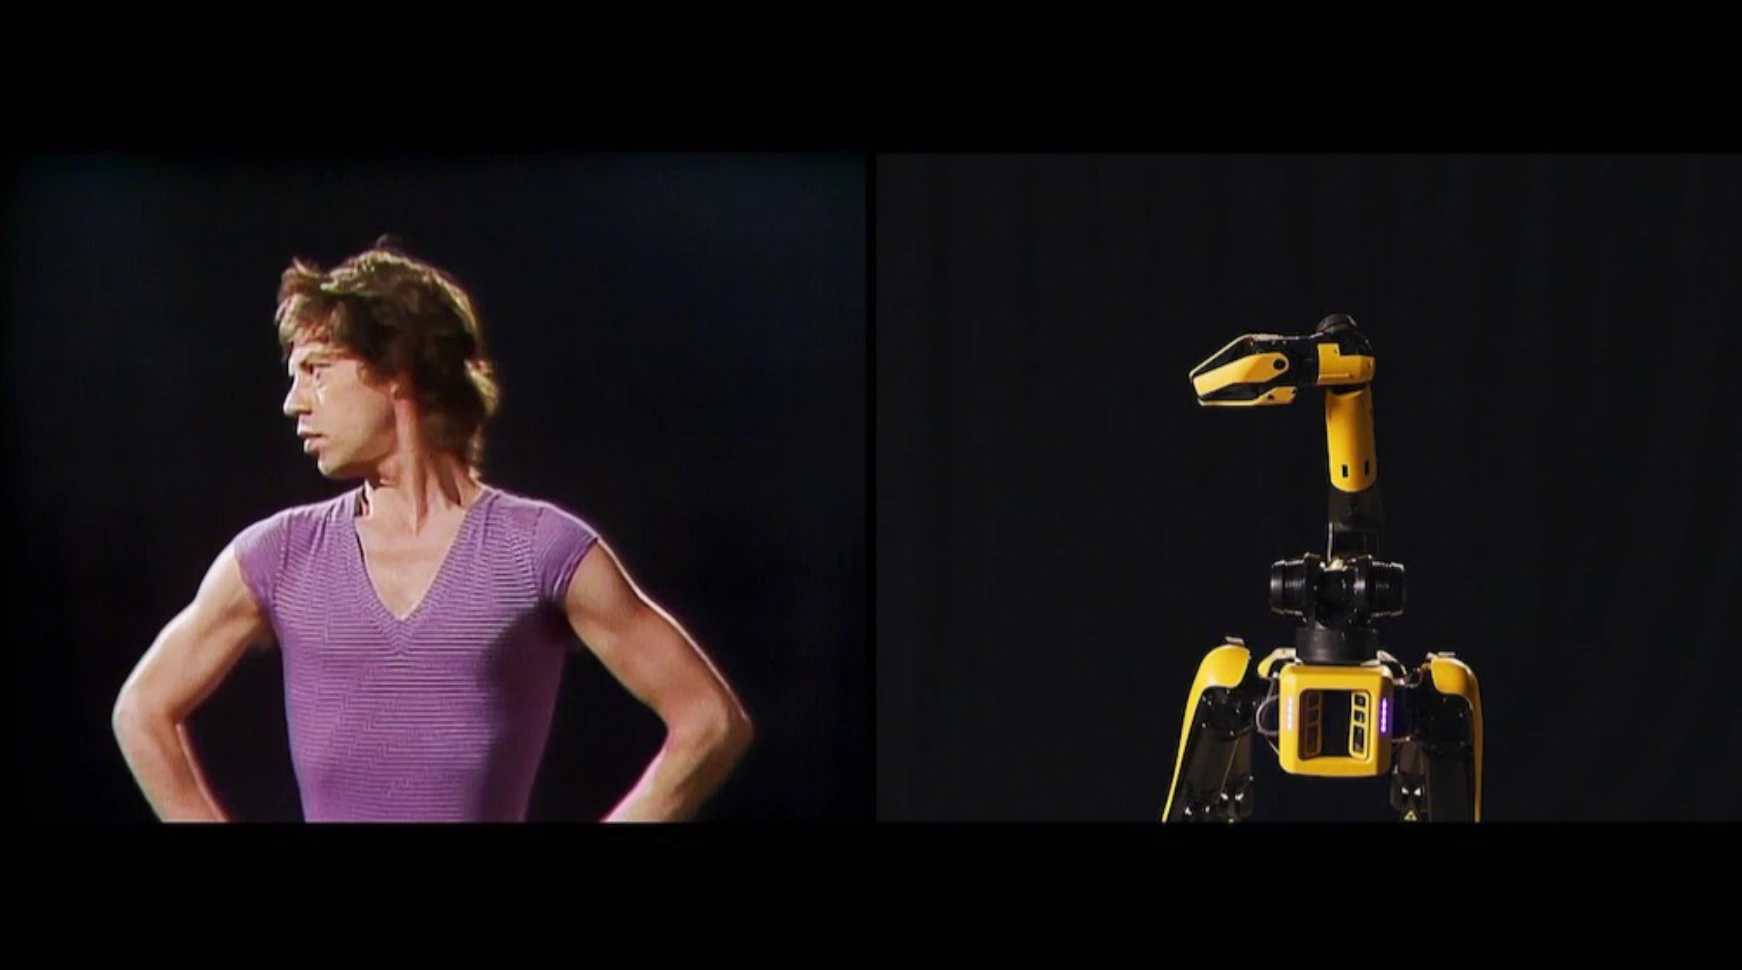 Boston Dynamics Robot Dog Does Perfect Imitation of Mick Jagger in Rolling Stones Video for ‘Start Me Up’